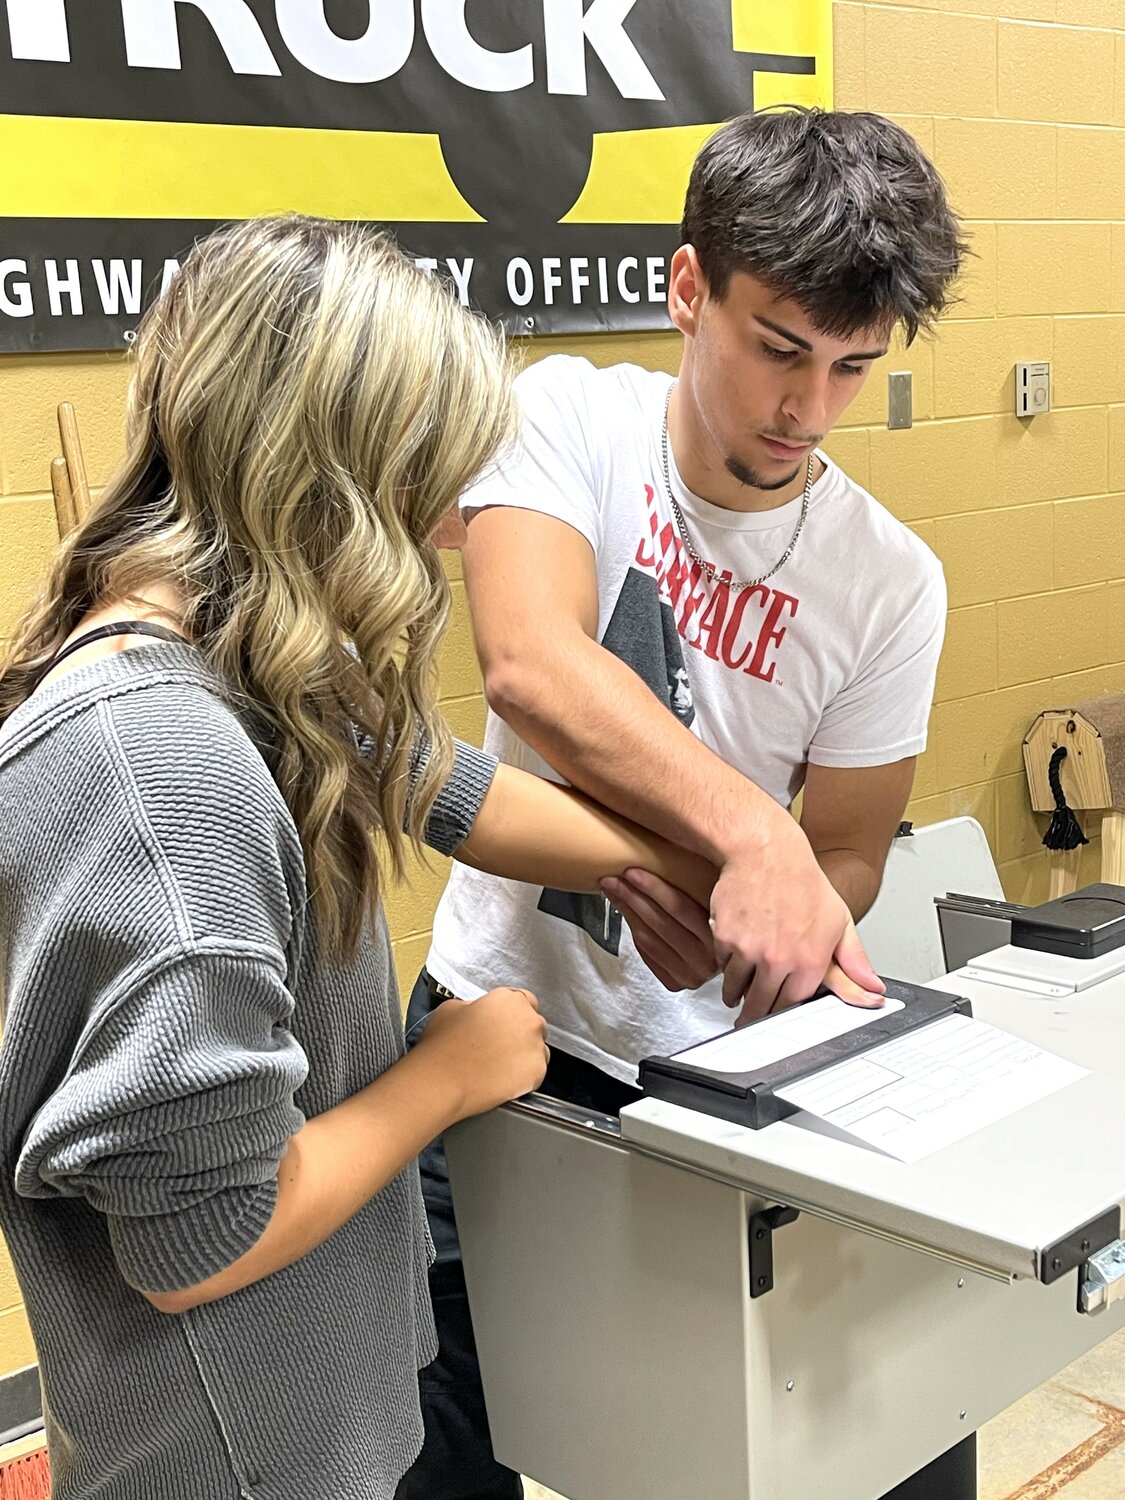 Students Ethan and Madison learn the art of fingerprinting in their criminal justice class at Community.